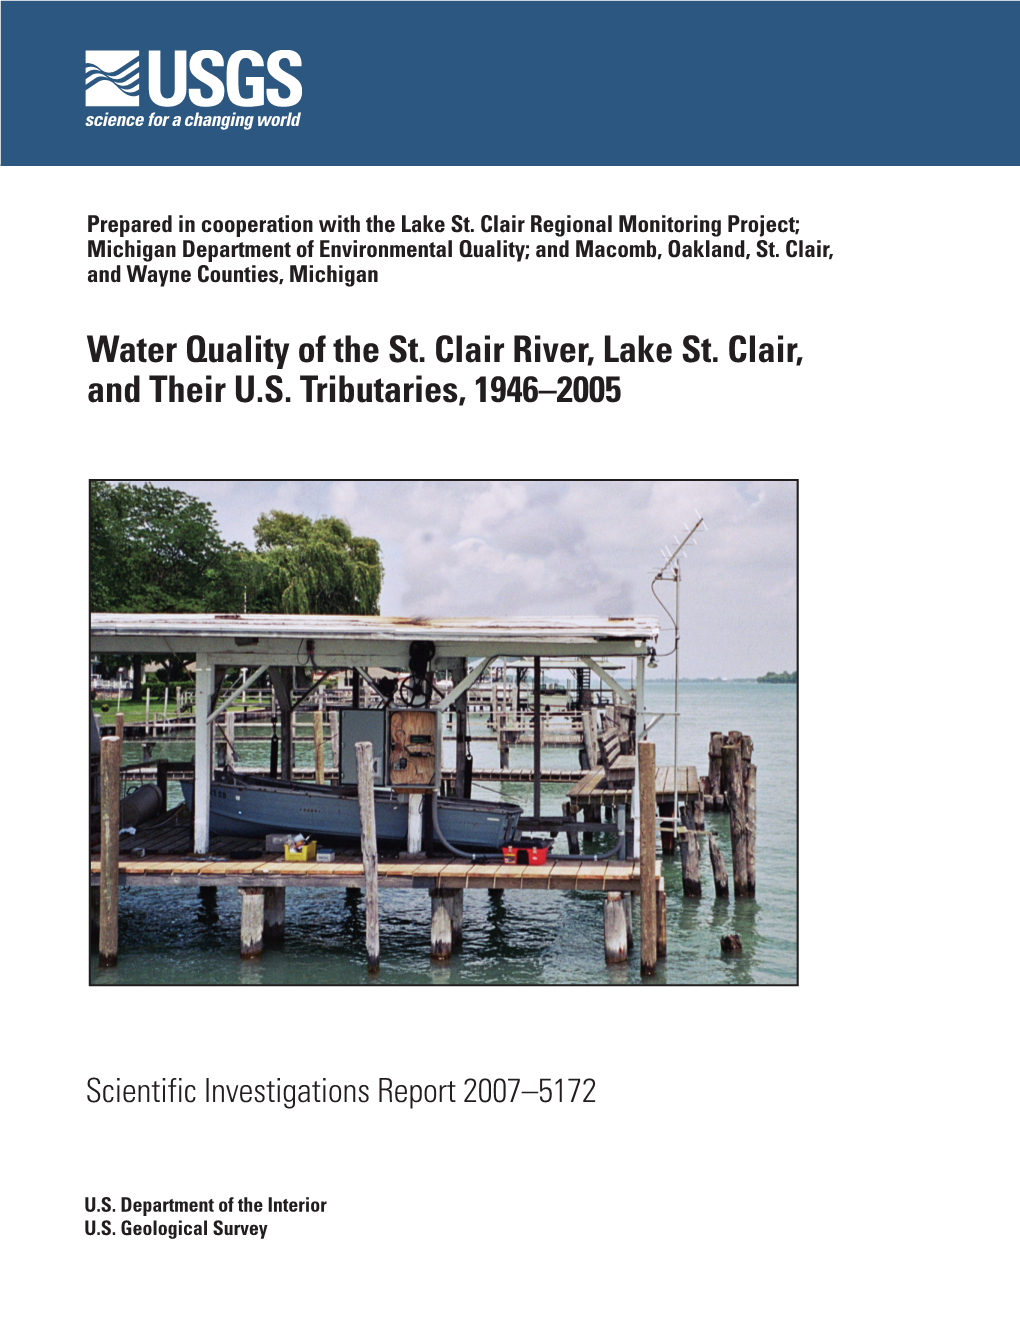 Water Quality of the St. Clair River, Lake St. Clair, and Their U.S. Tributaries, 1946–2005